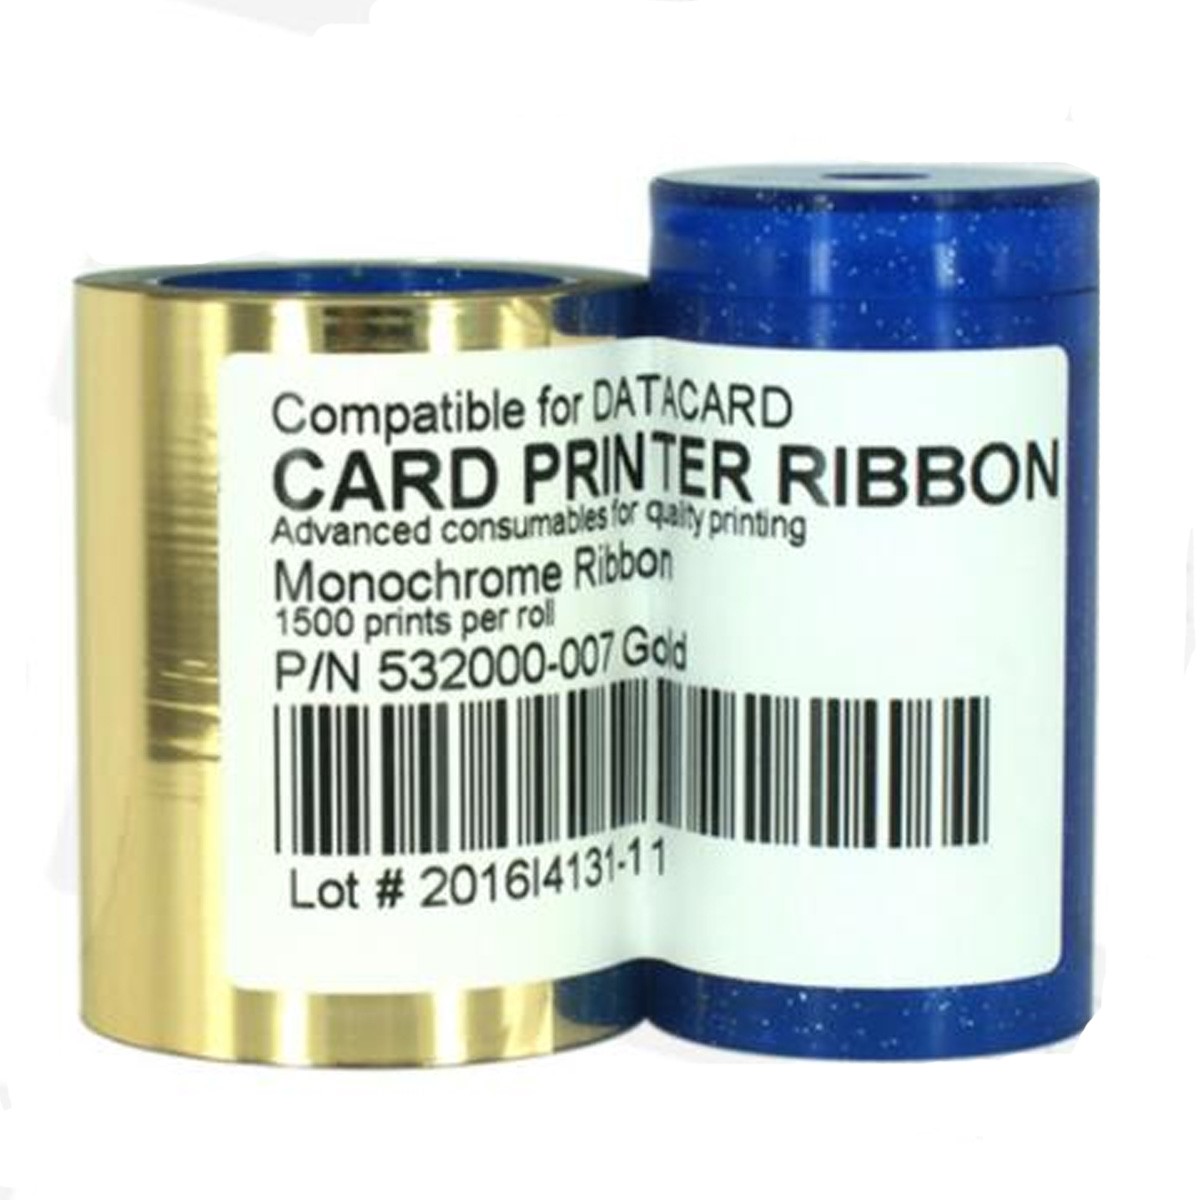 New color ribbon for Datacard 532000-007 Gold 1500 sheet - Click Image to Close